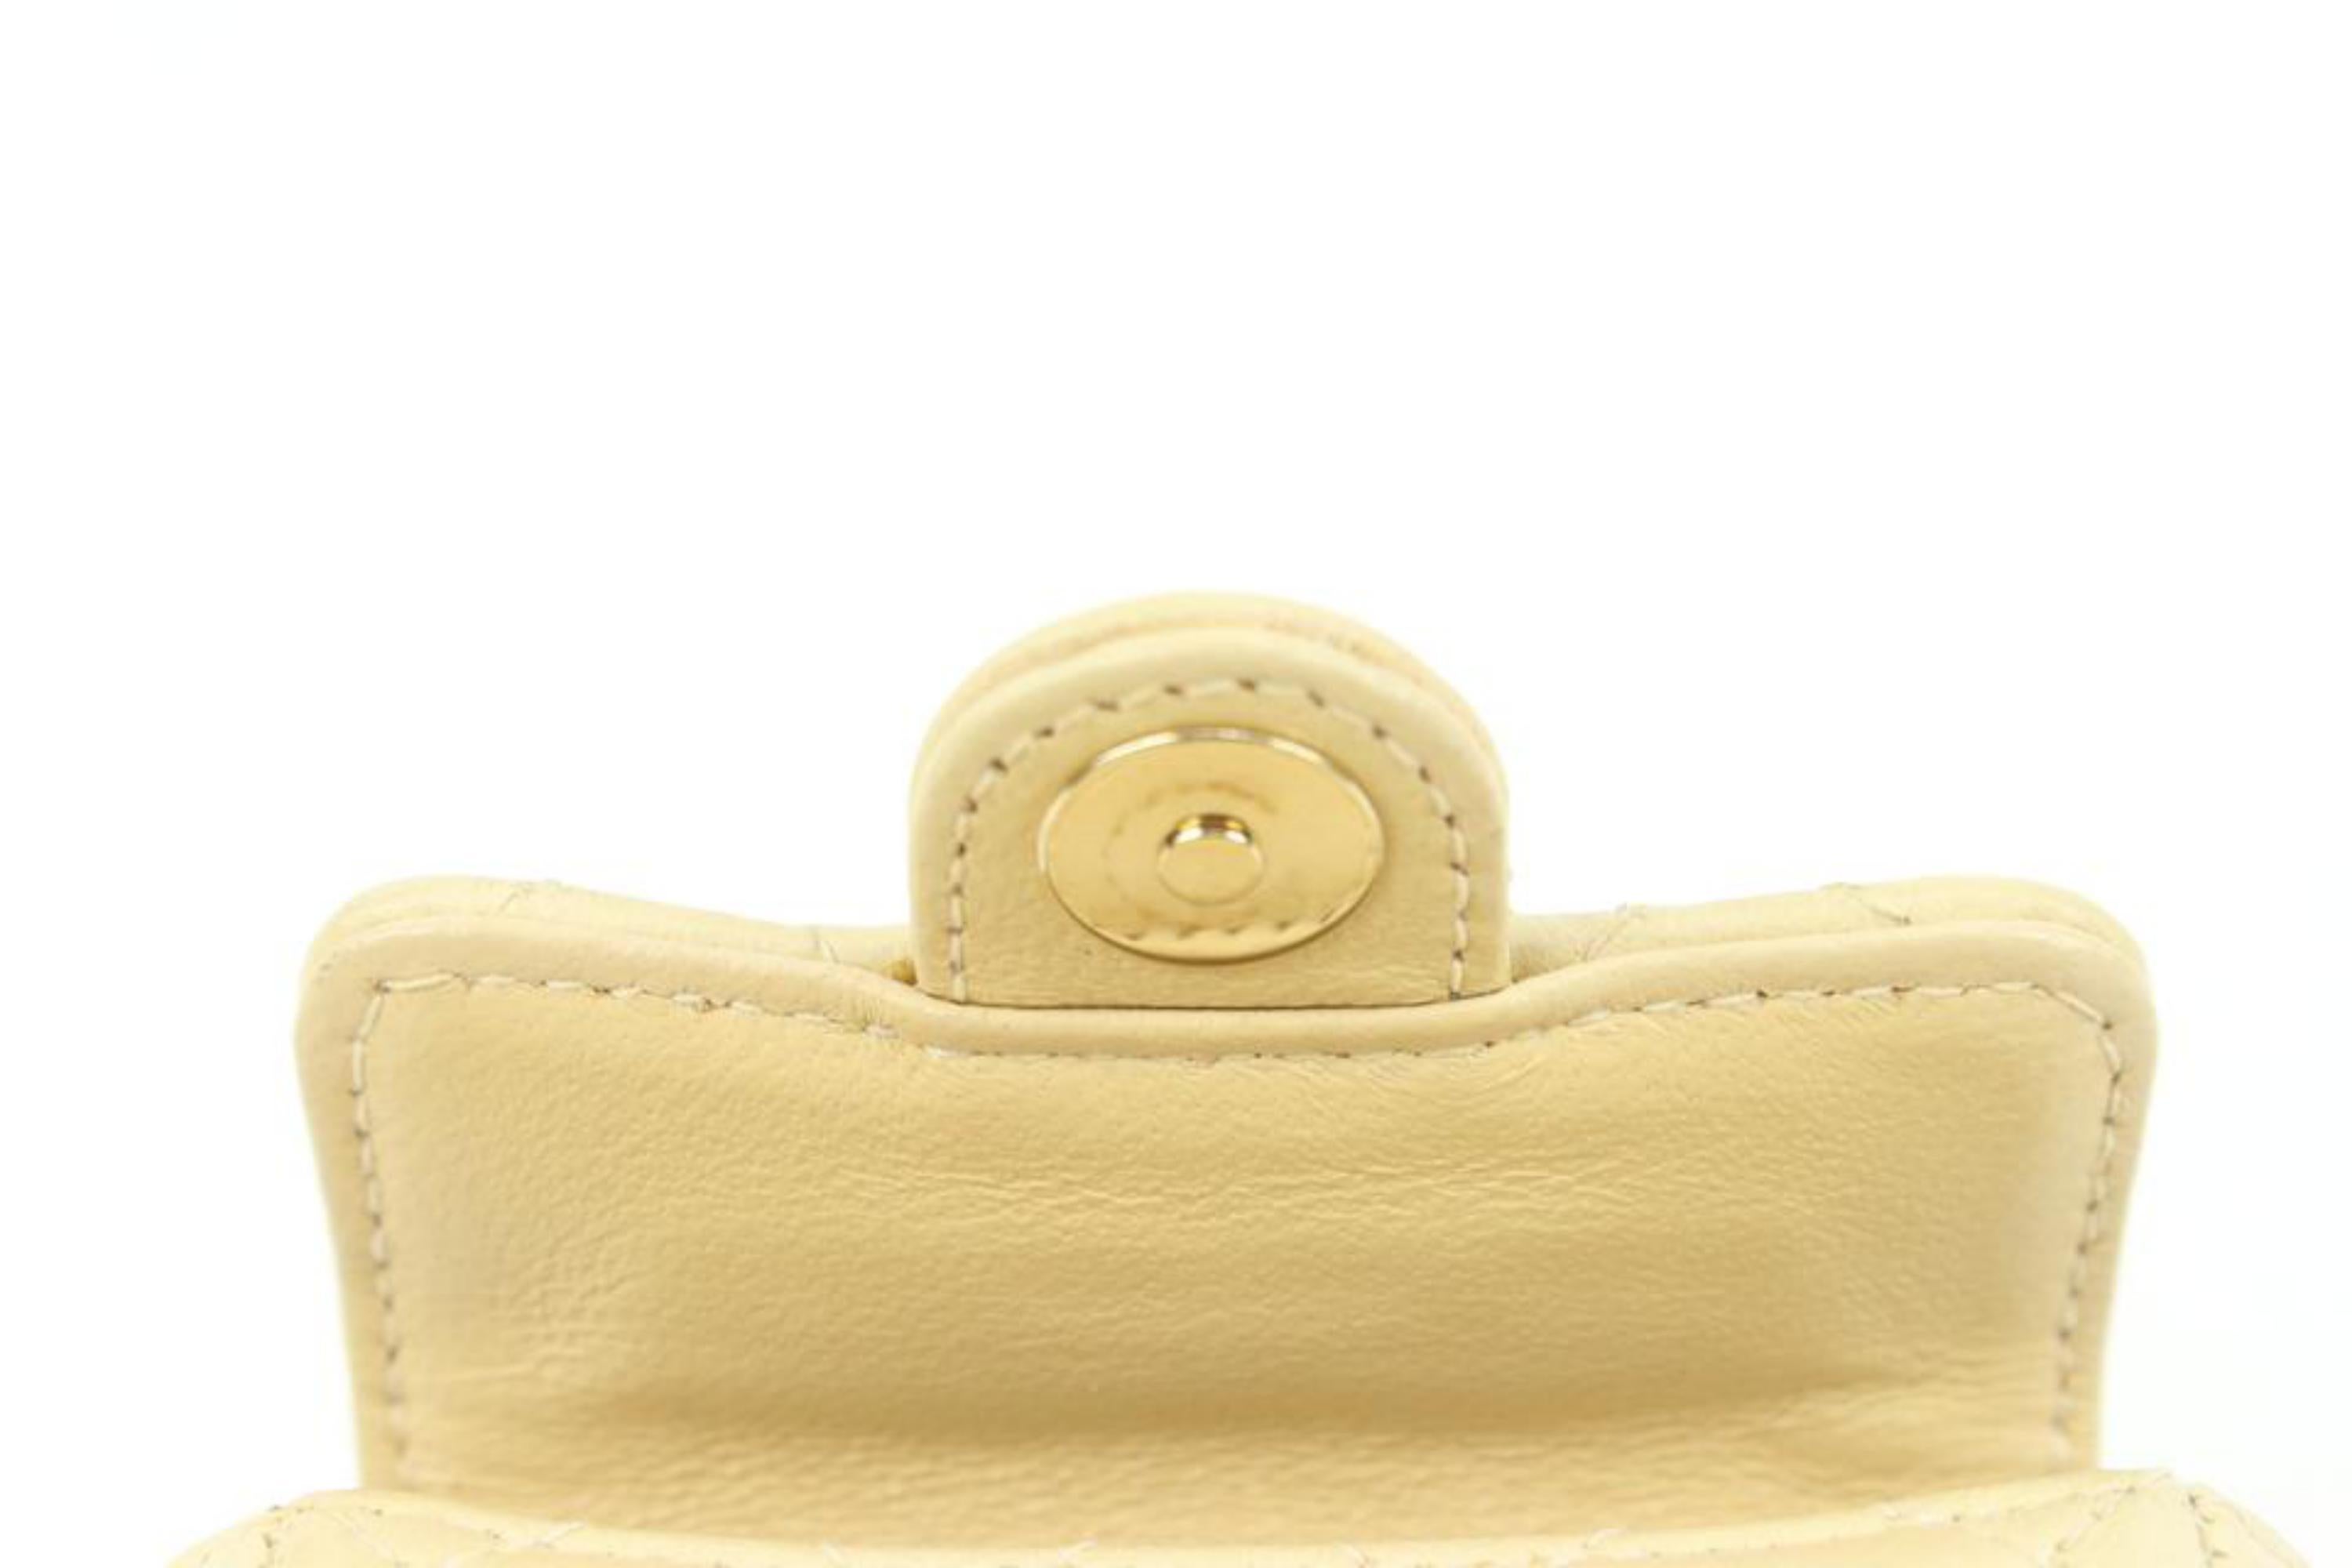 Chanel Light Beige Cream Quilted Leather Micro Flap Charm Bag Mini 48cz47 For Sale 1